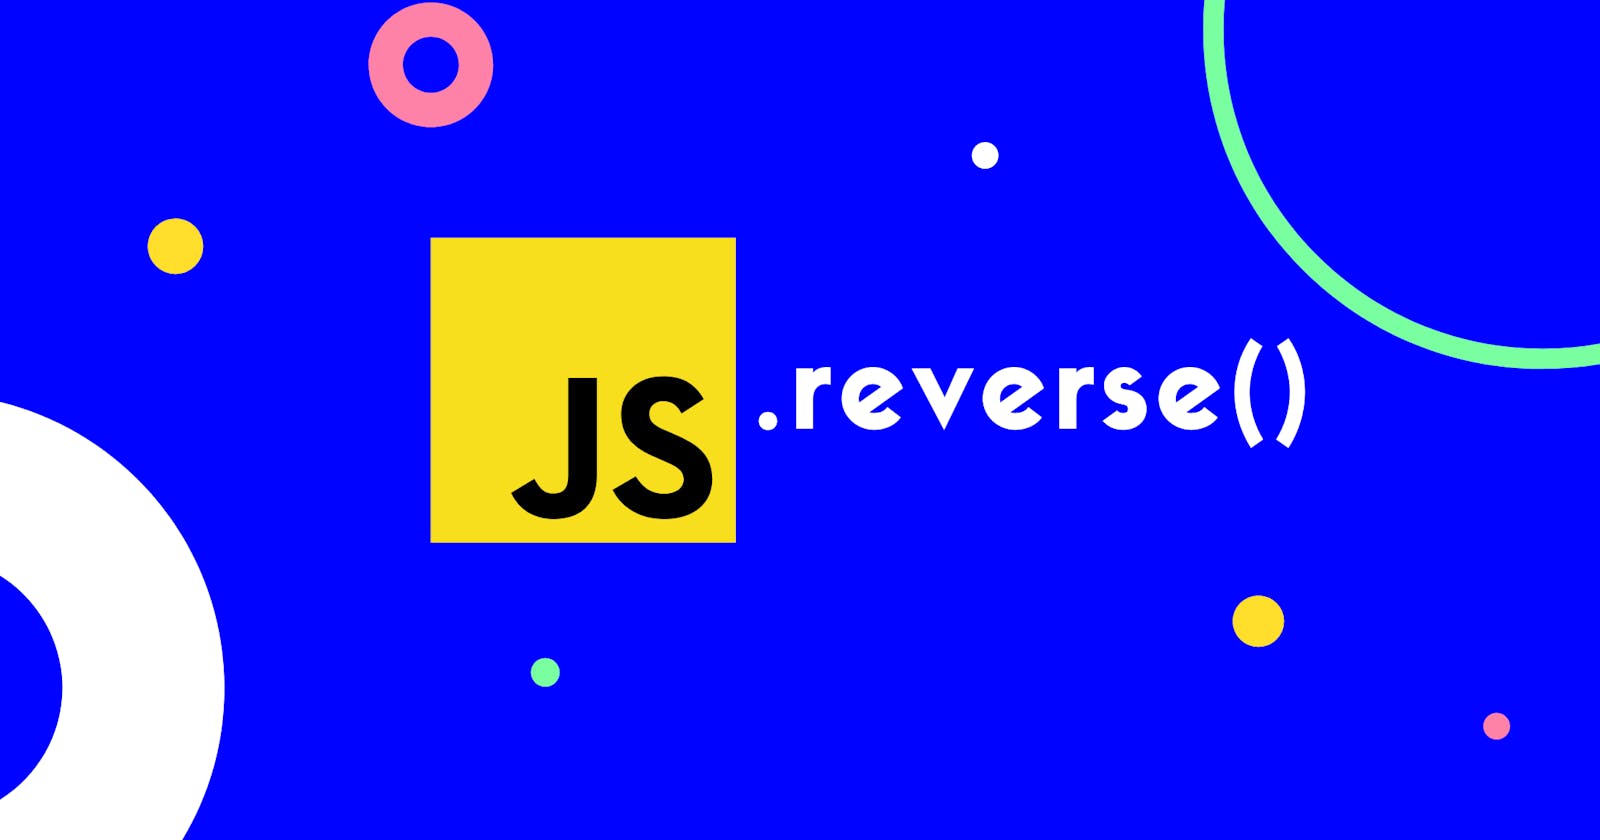 3 Ways to Reverse a String in JavaScript